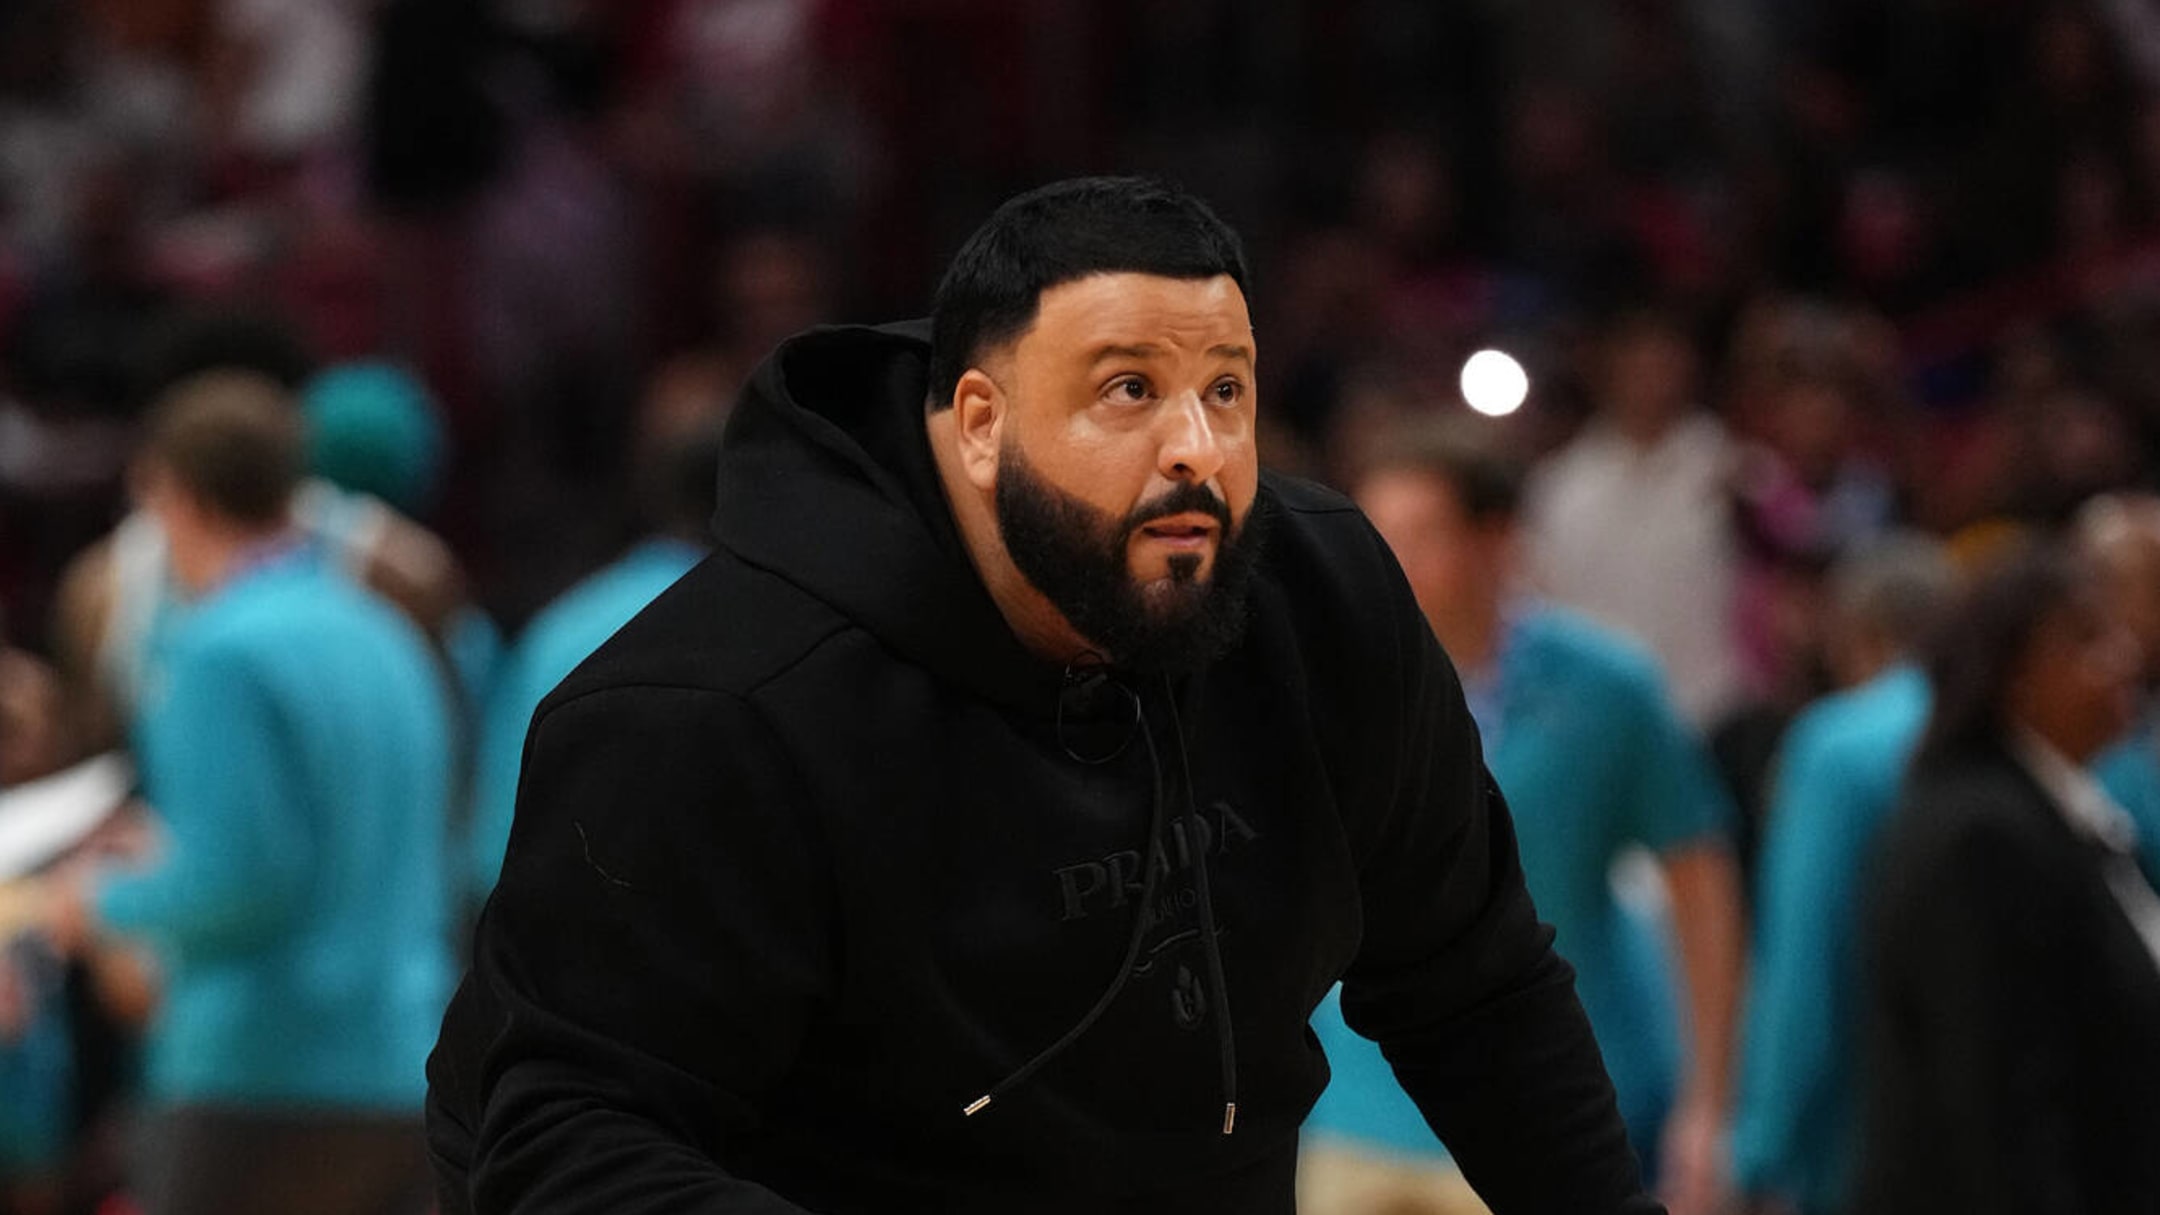 DJ Khaled Had A Pillow For His Jordan Shoes At A Heat Game